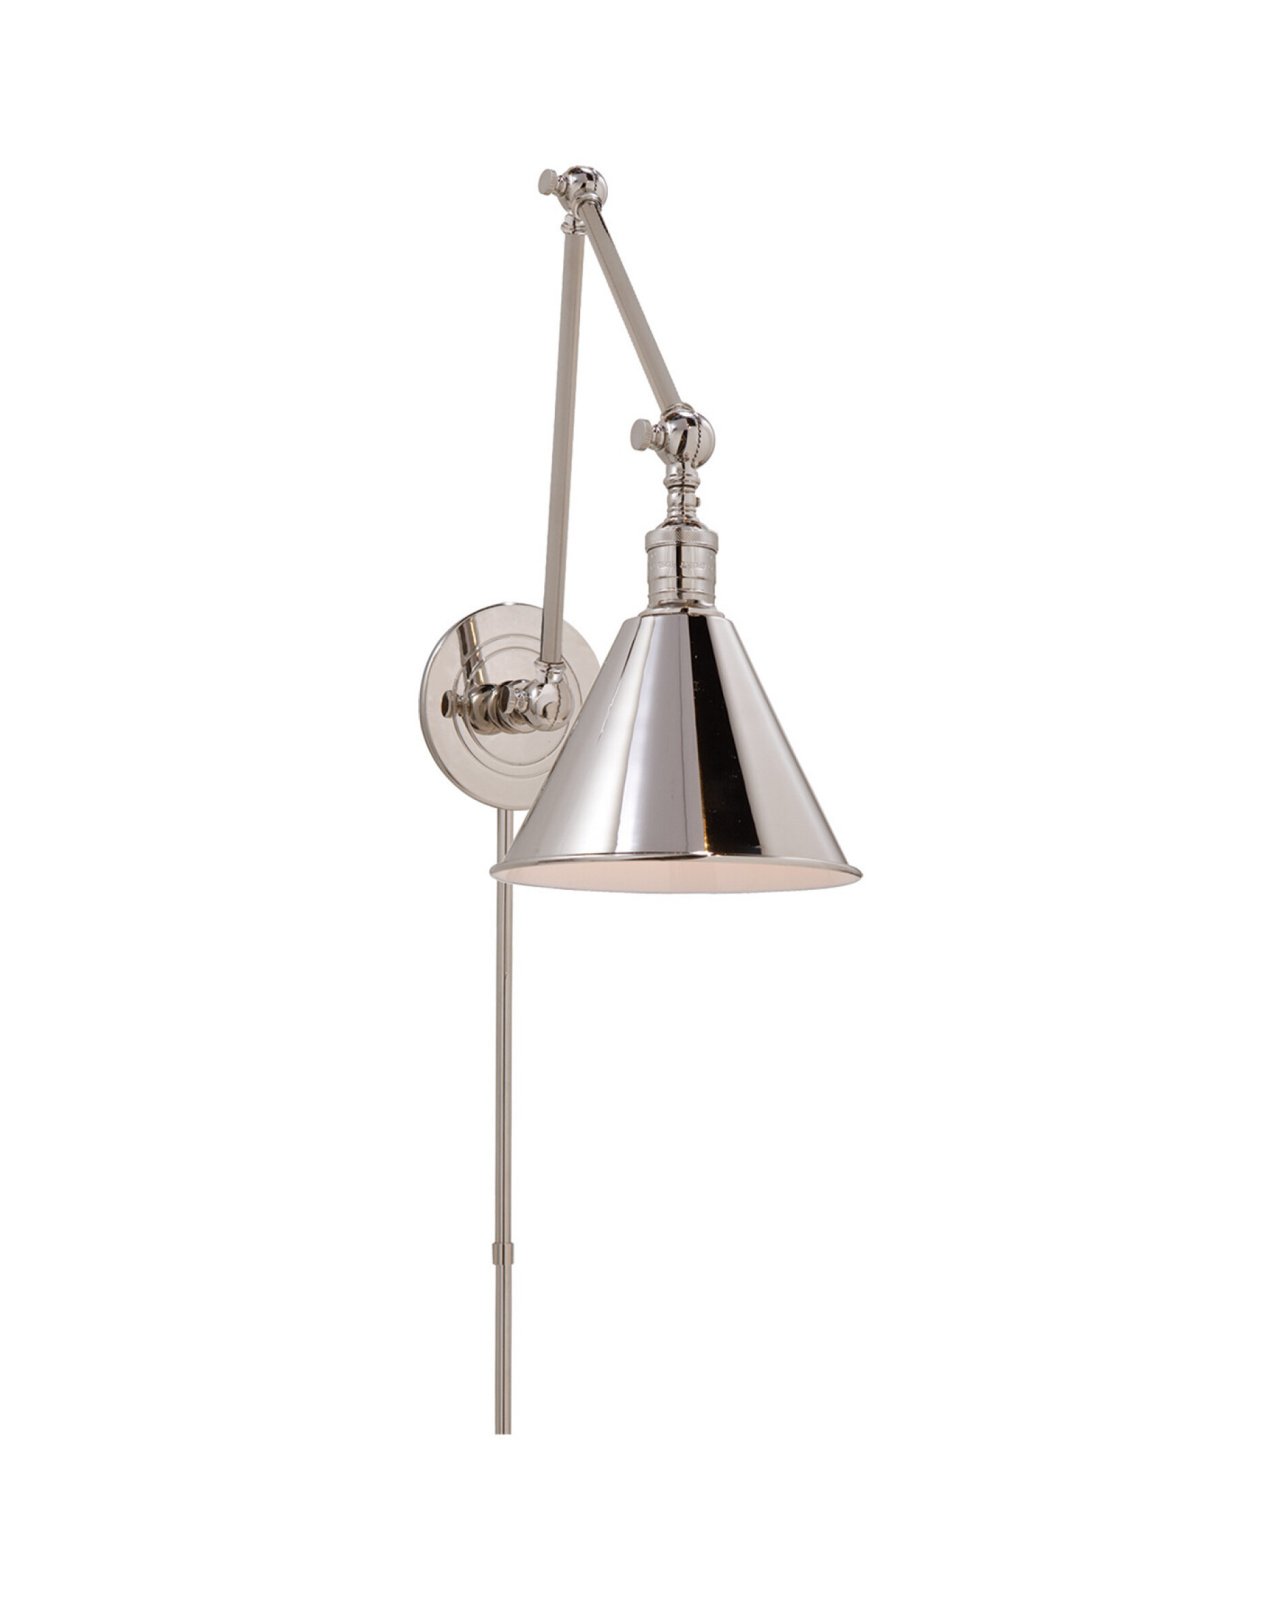 Double Boston Functional Library Light Polished Nickel